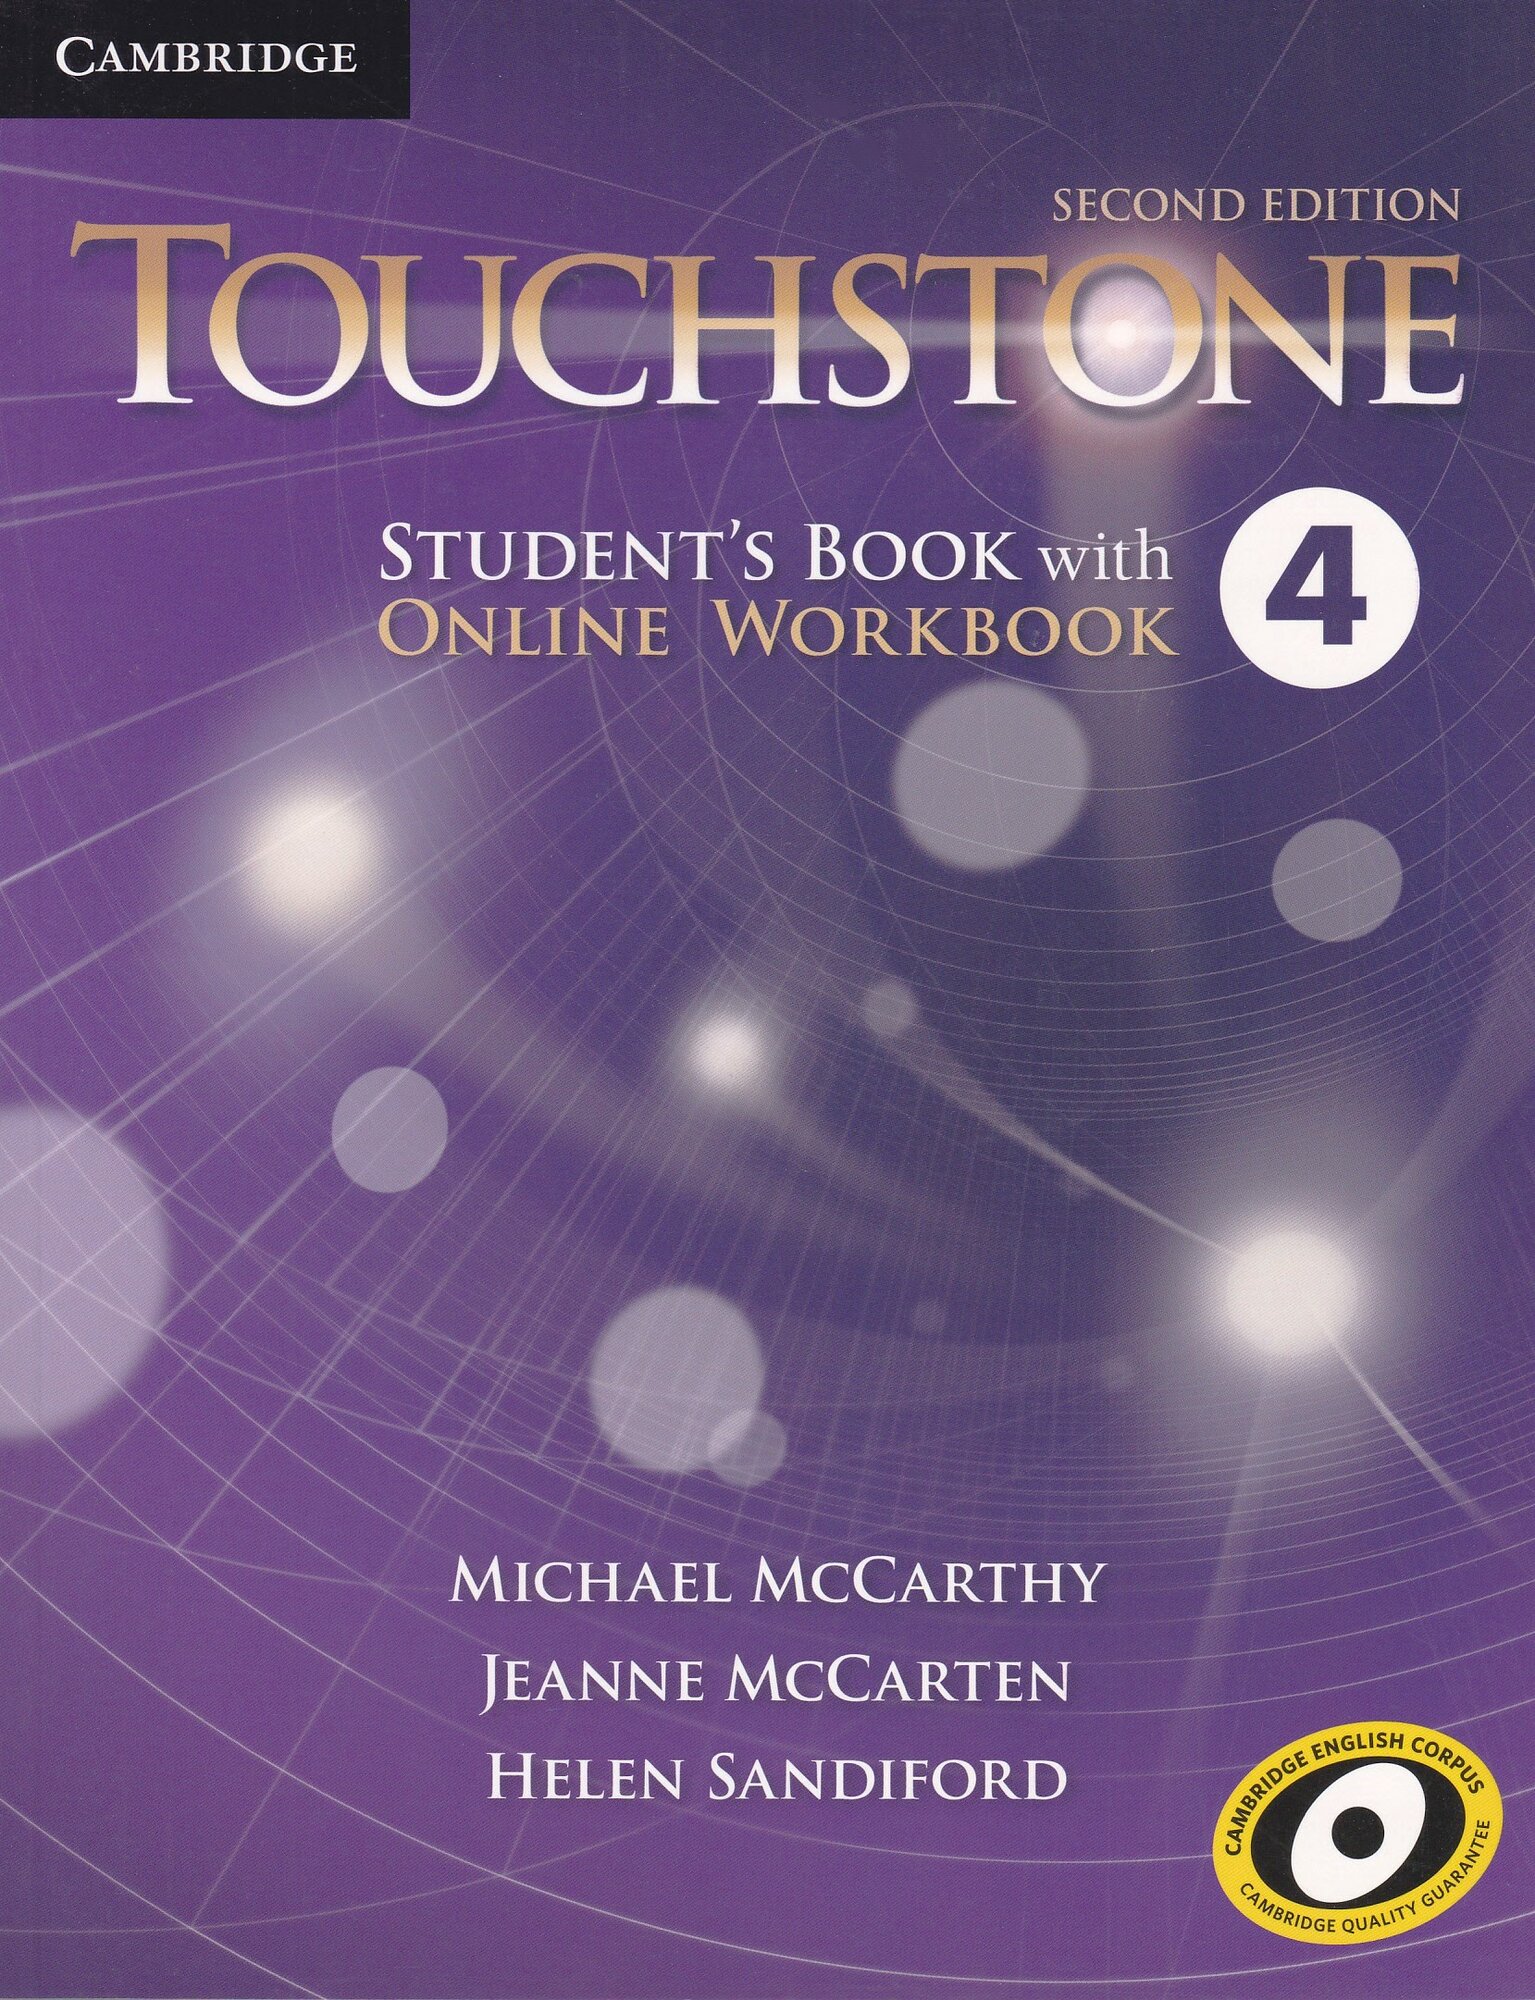 Touchstone Second Edition 4 Student's Book with Online Workbook